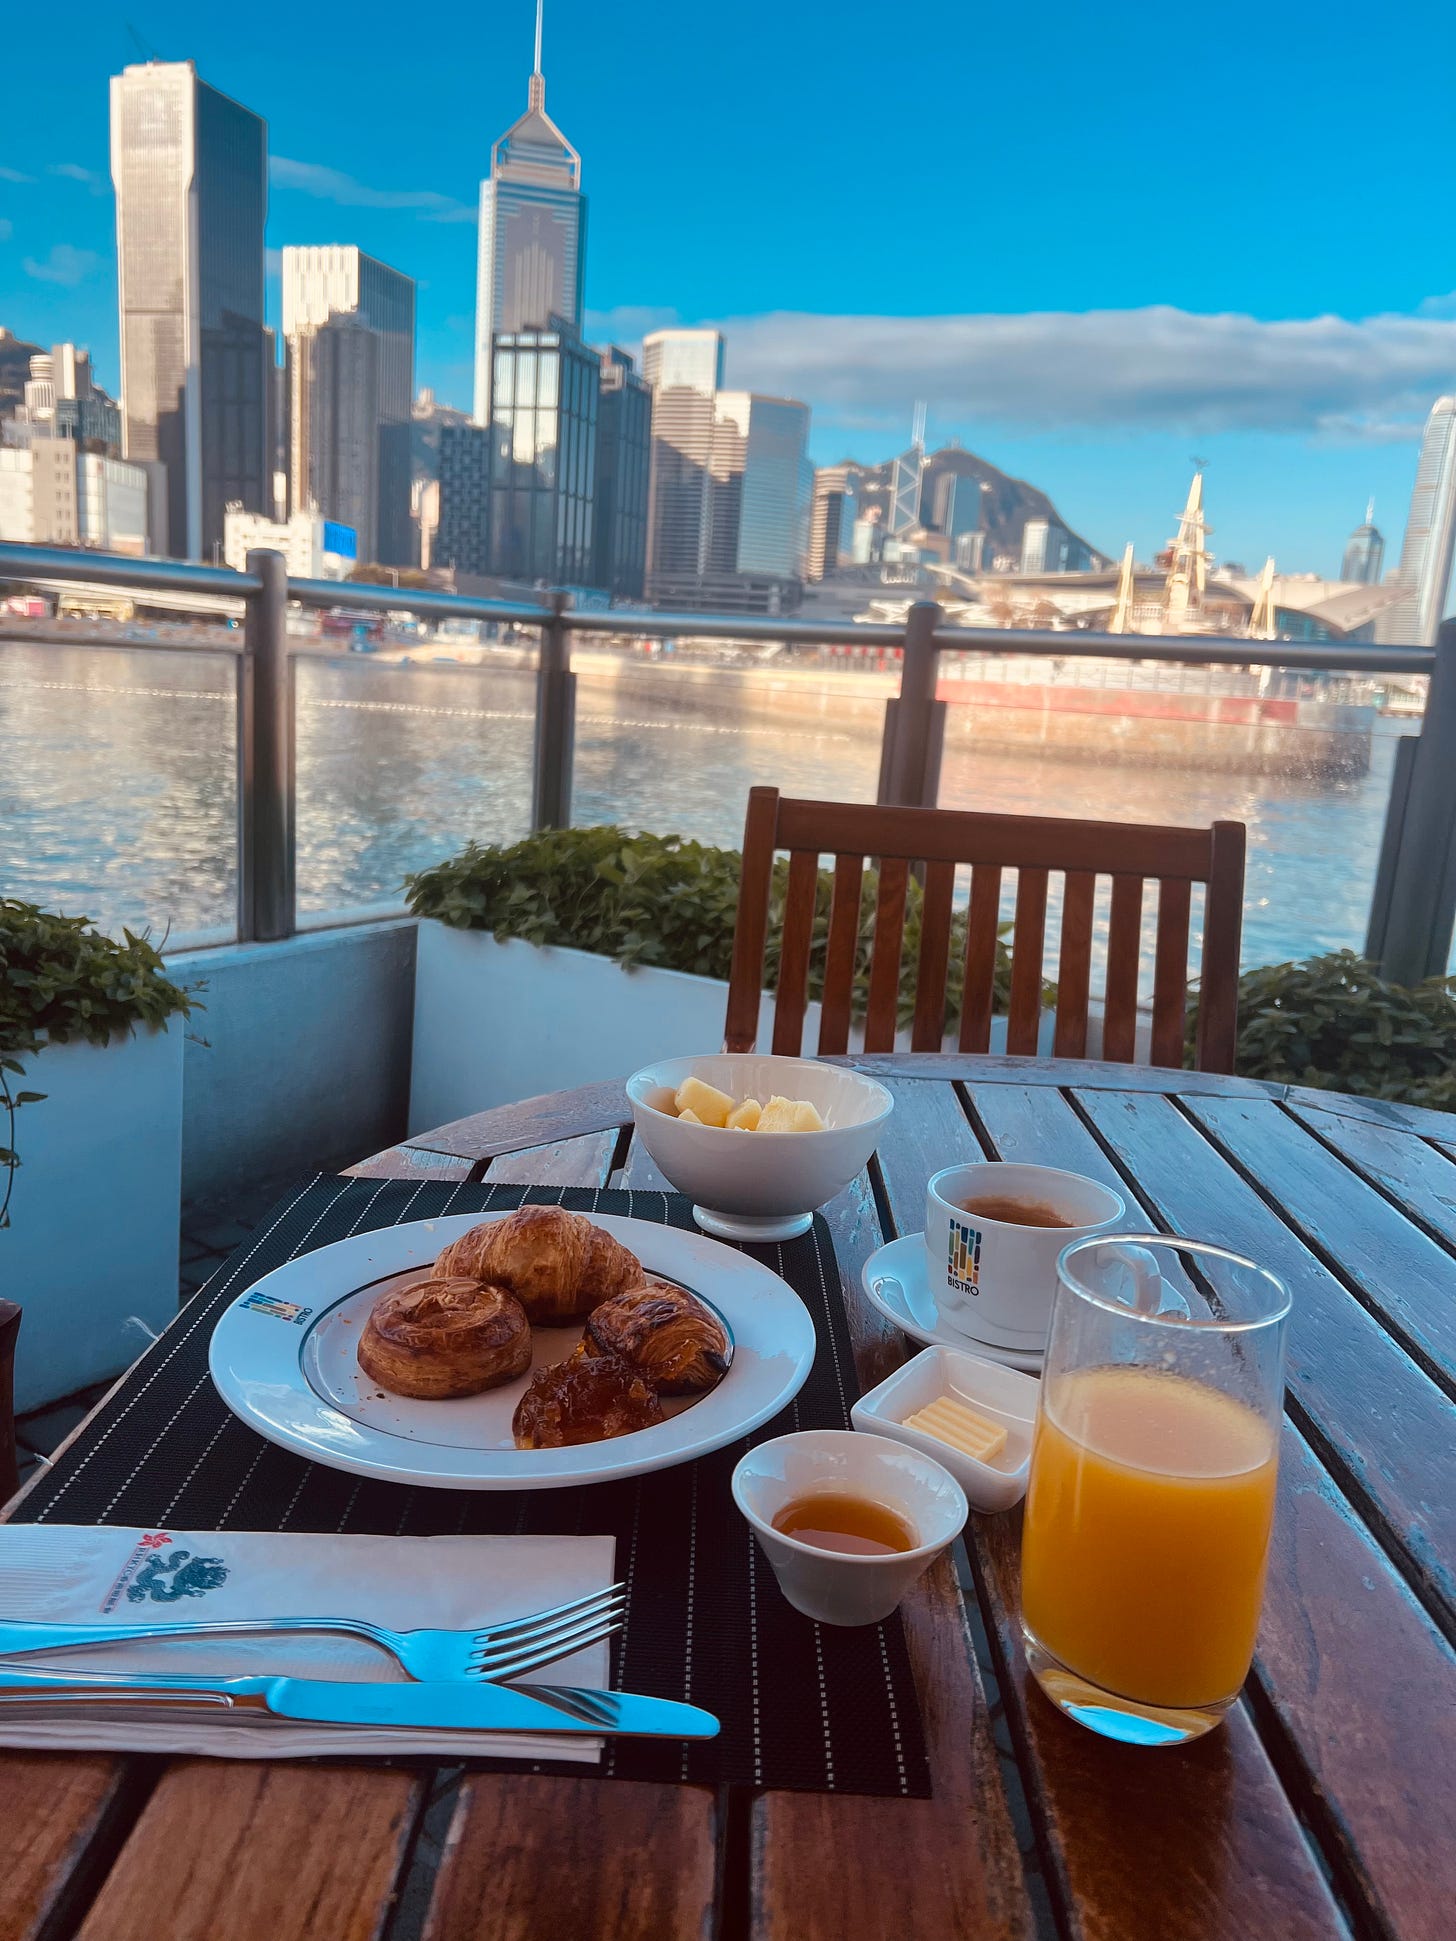 Picture of a breakfast with a harbour in the background